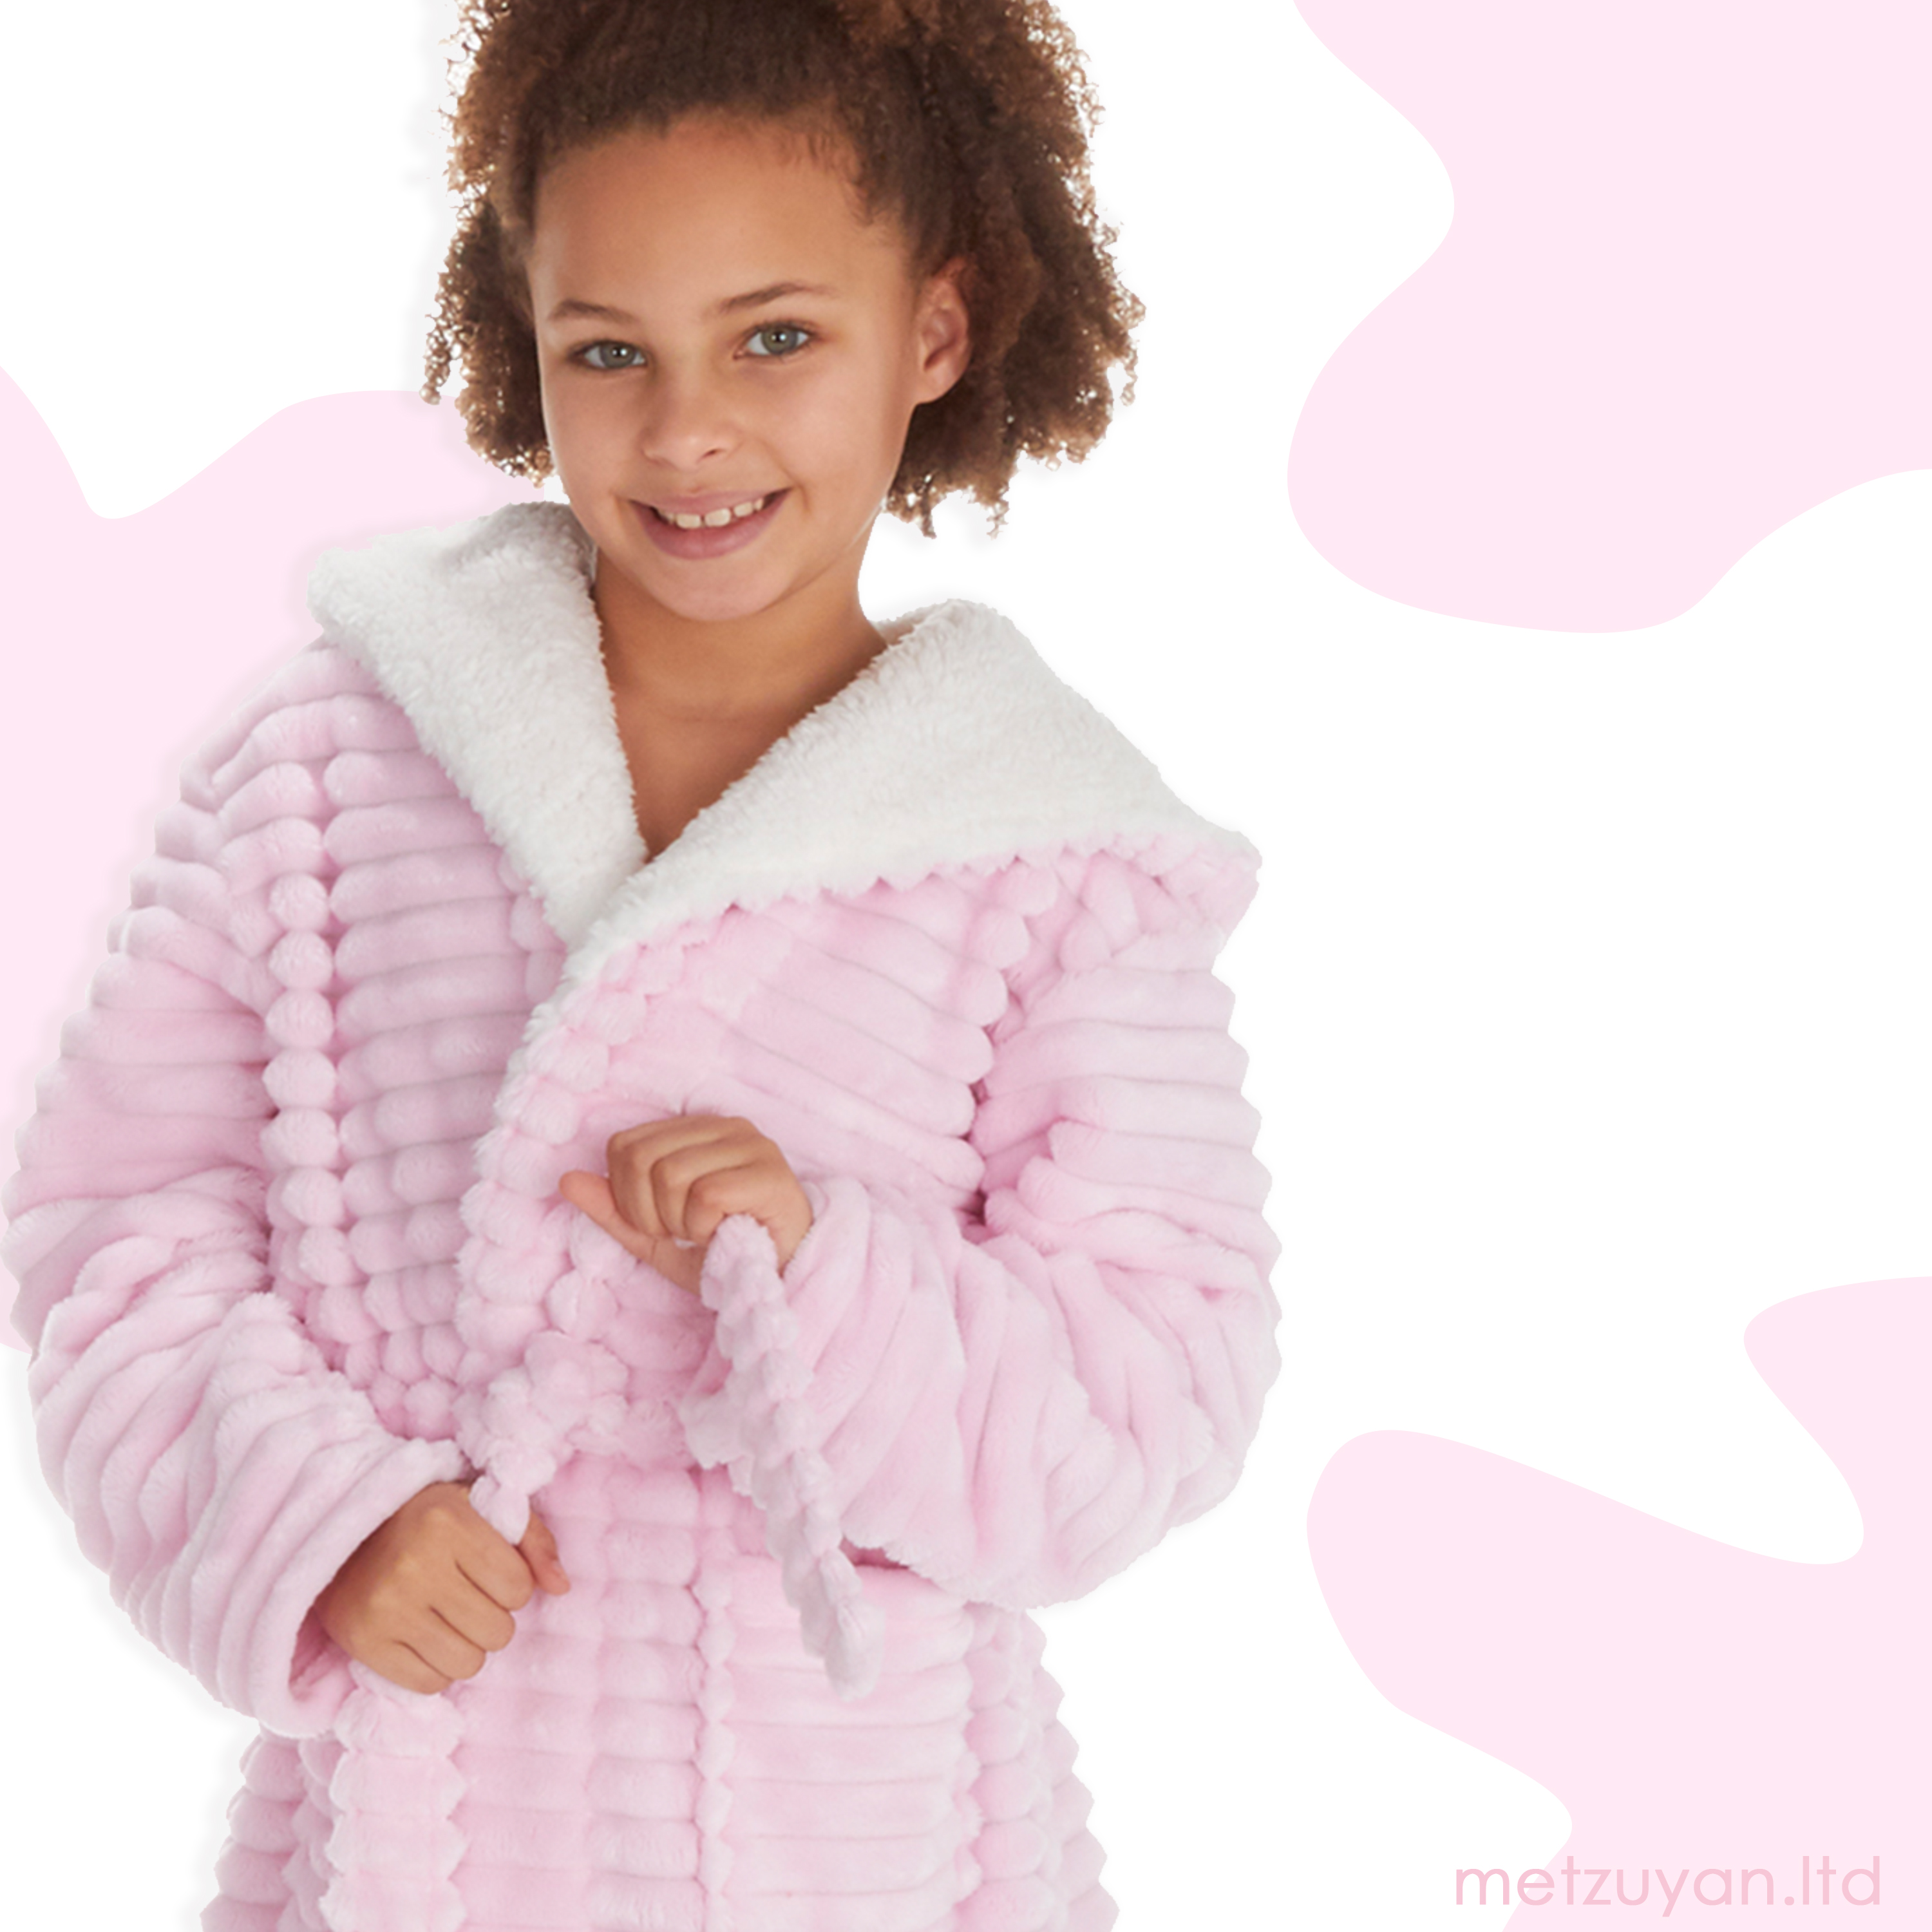 Kids' bathrobes & dressing gown size 1-2 months, compare prices and buy  online